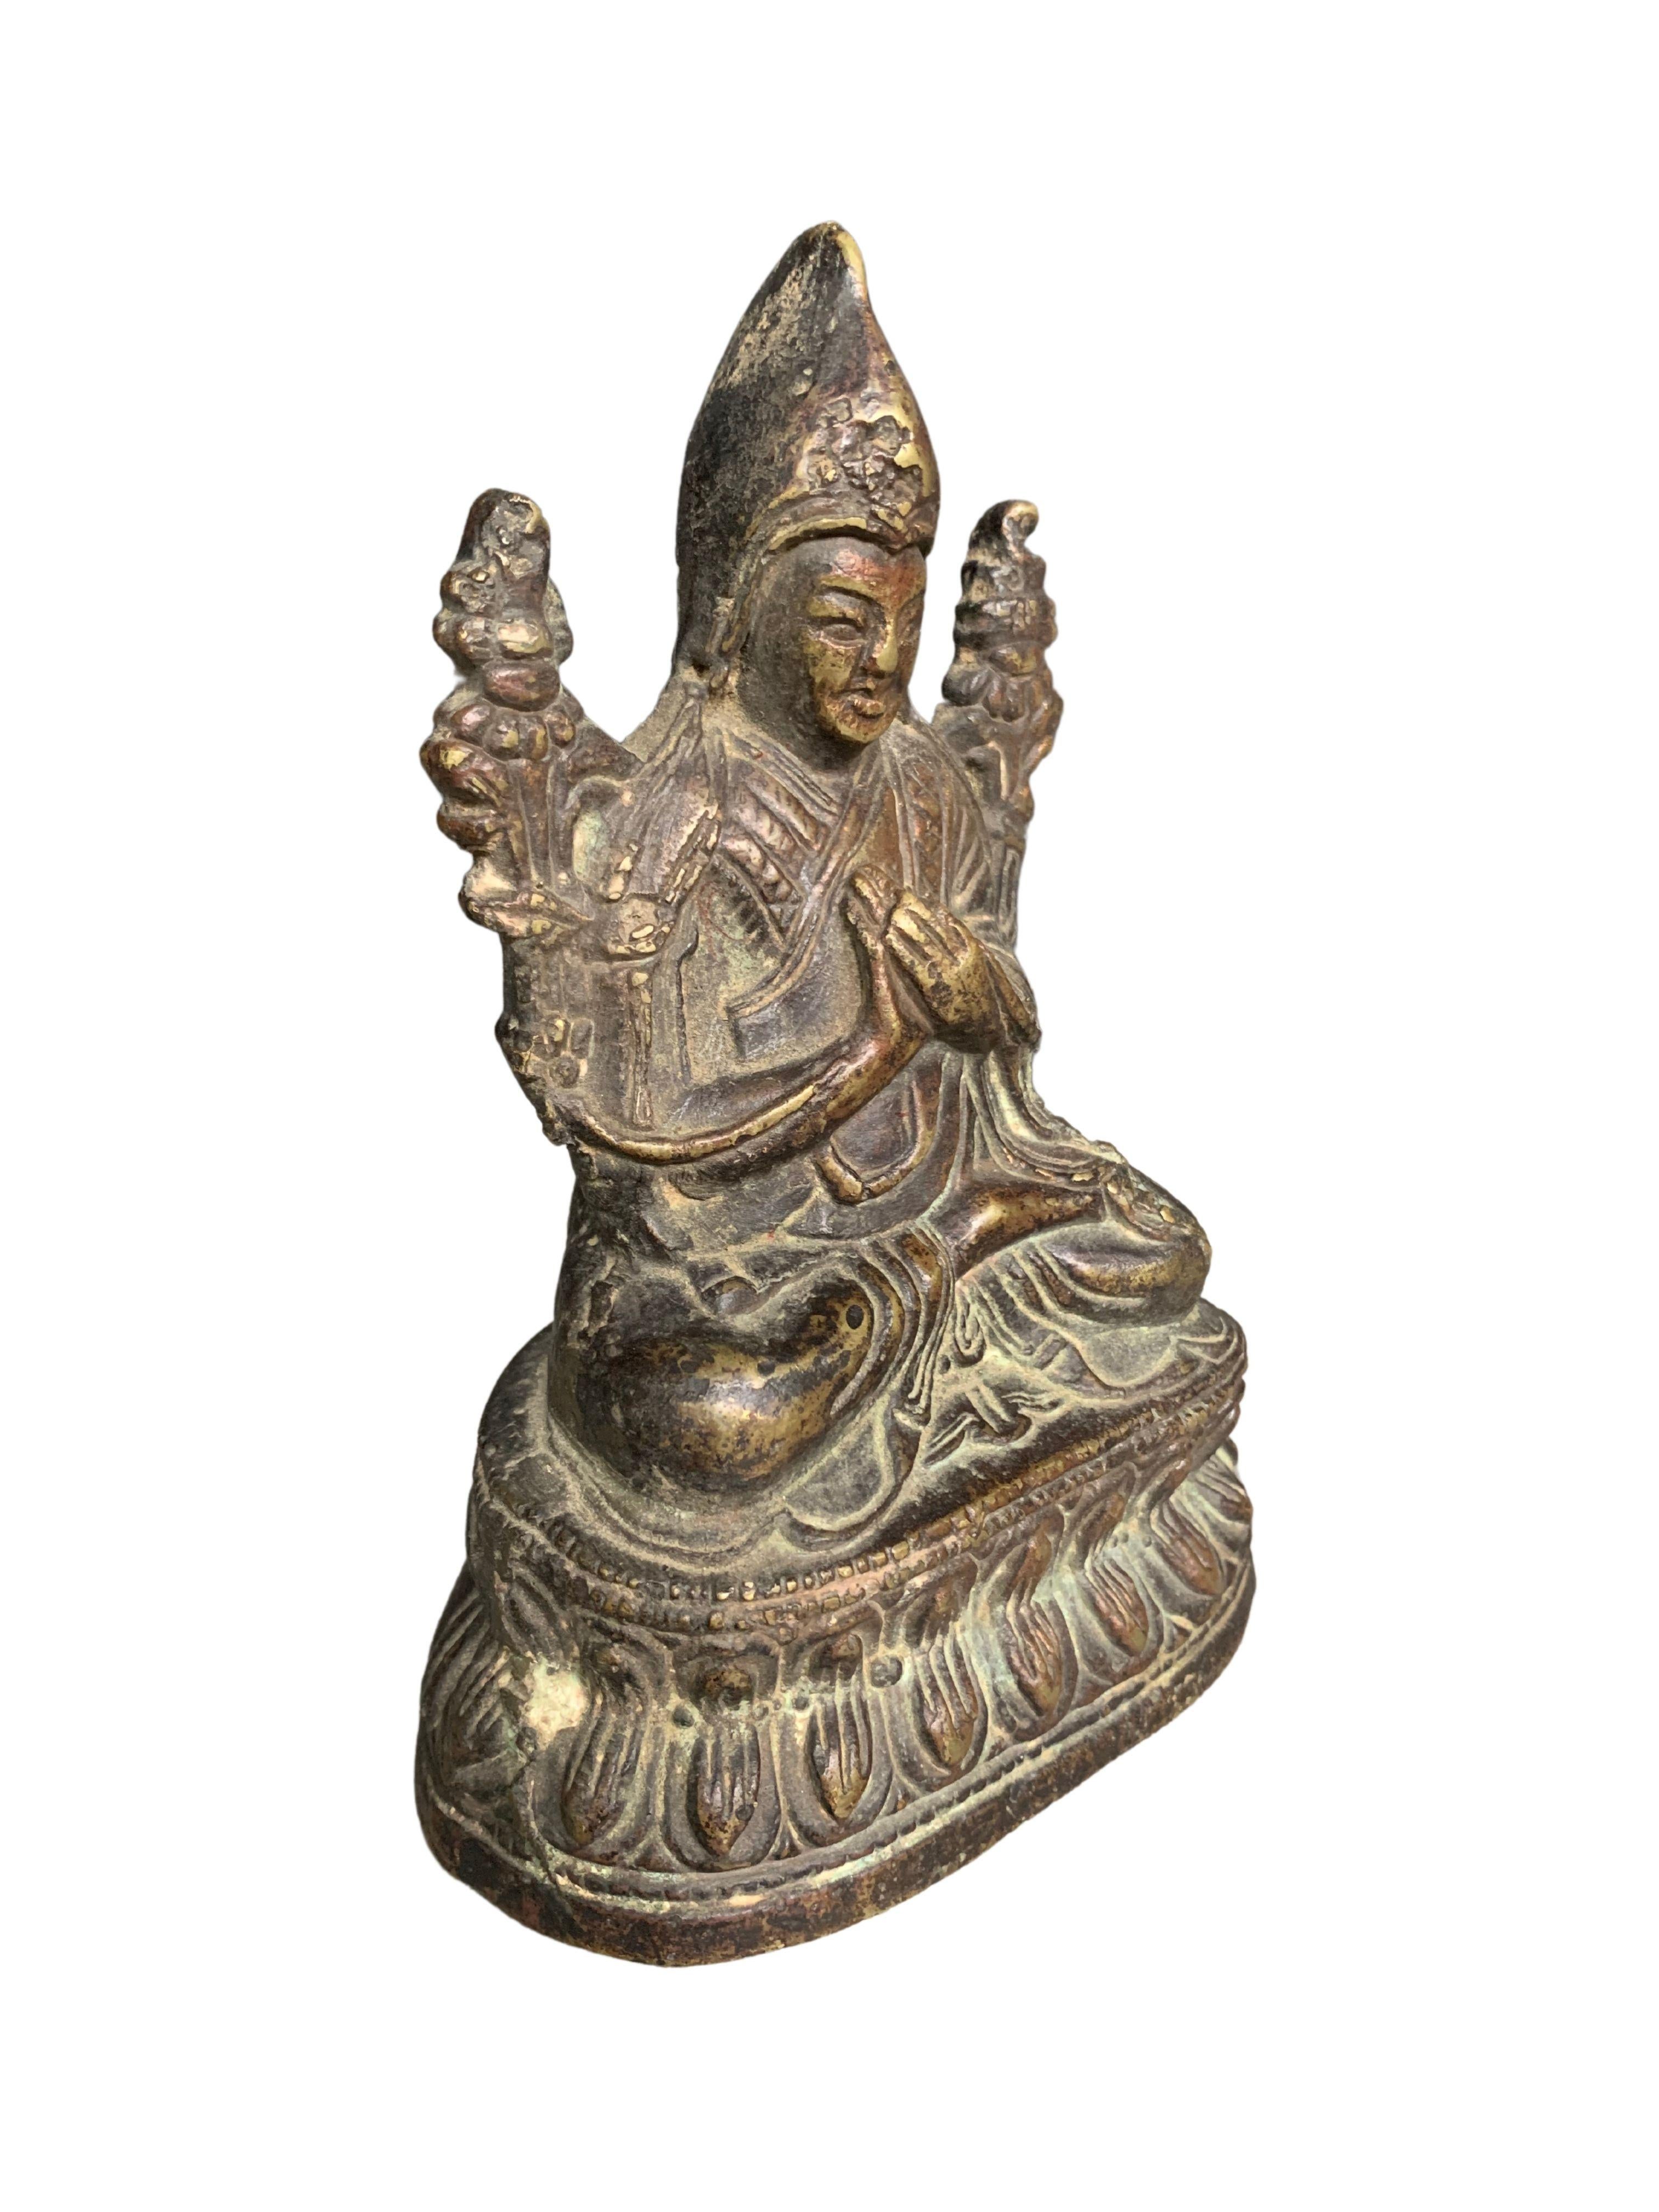 A wonderful Tibetan bronze seated buddha on a lotus pedestal from the 19th century. This buddha features a lovely age related patina as well as rich detailing.